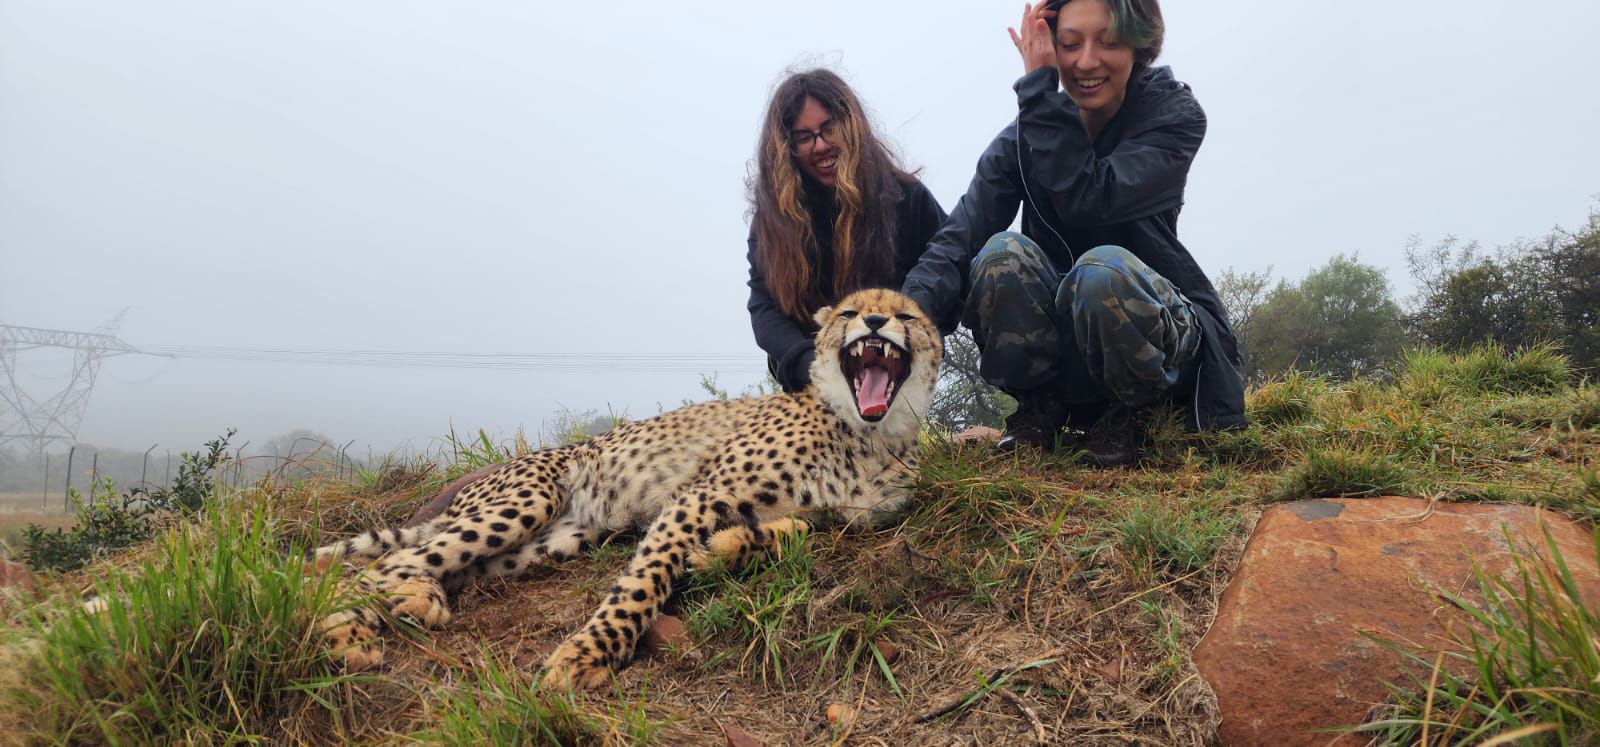 Elena knelling down with another woman and a cheetah with its mouth open in South Africa